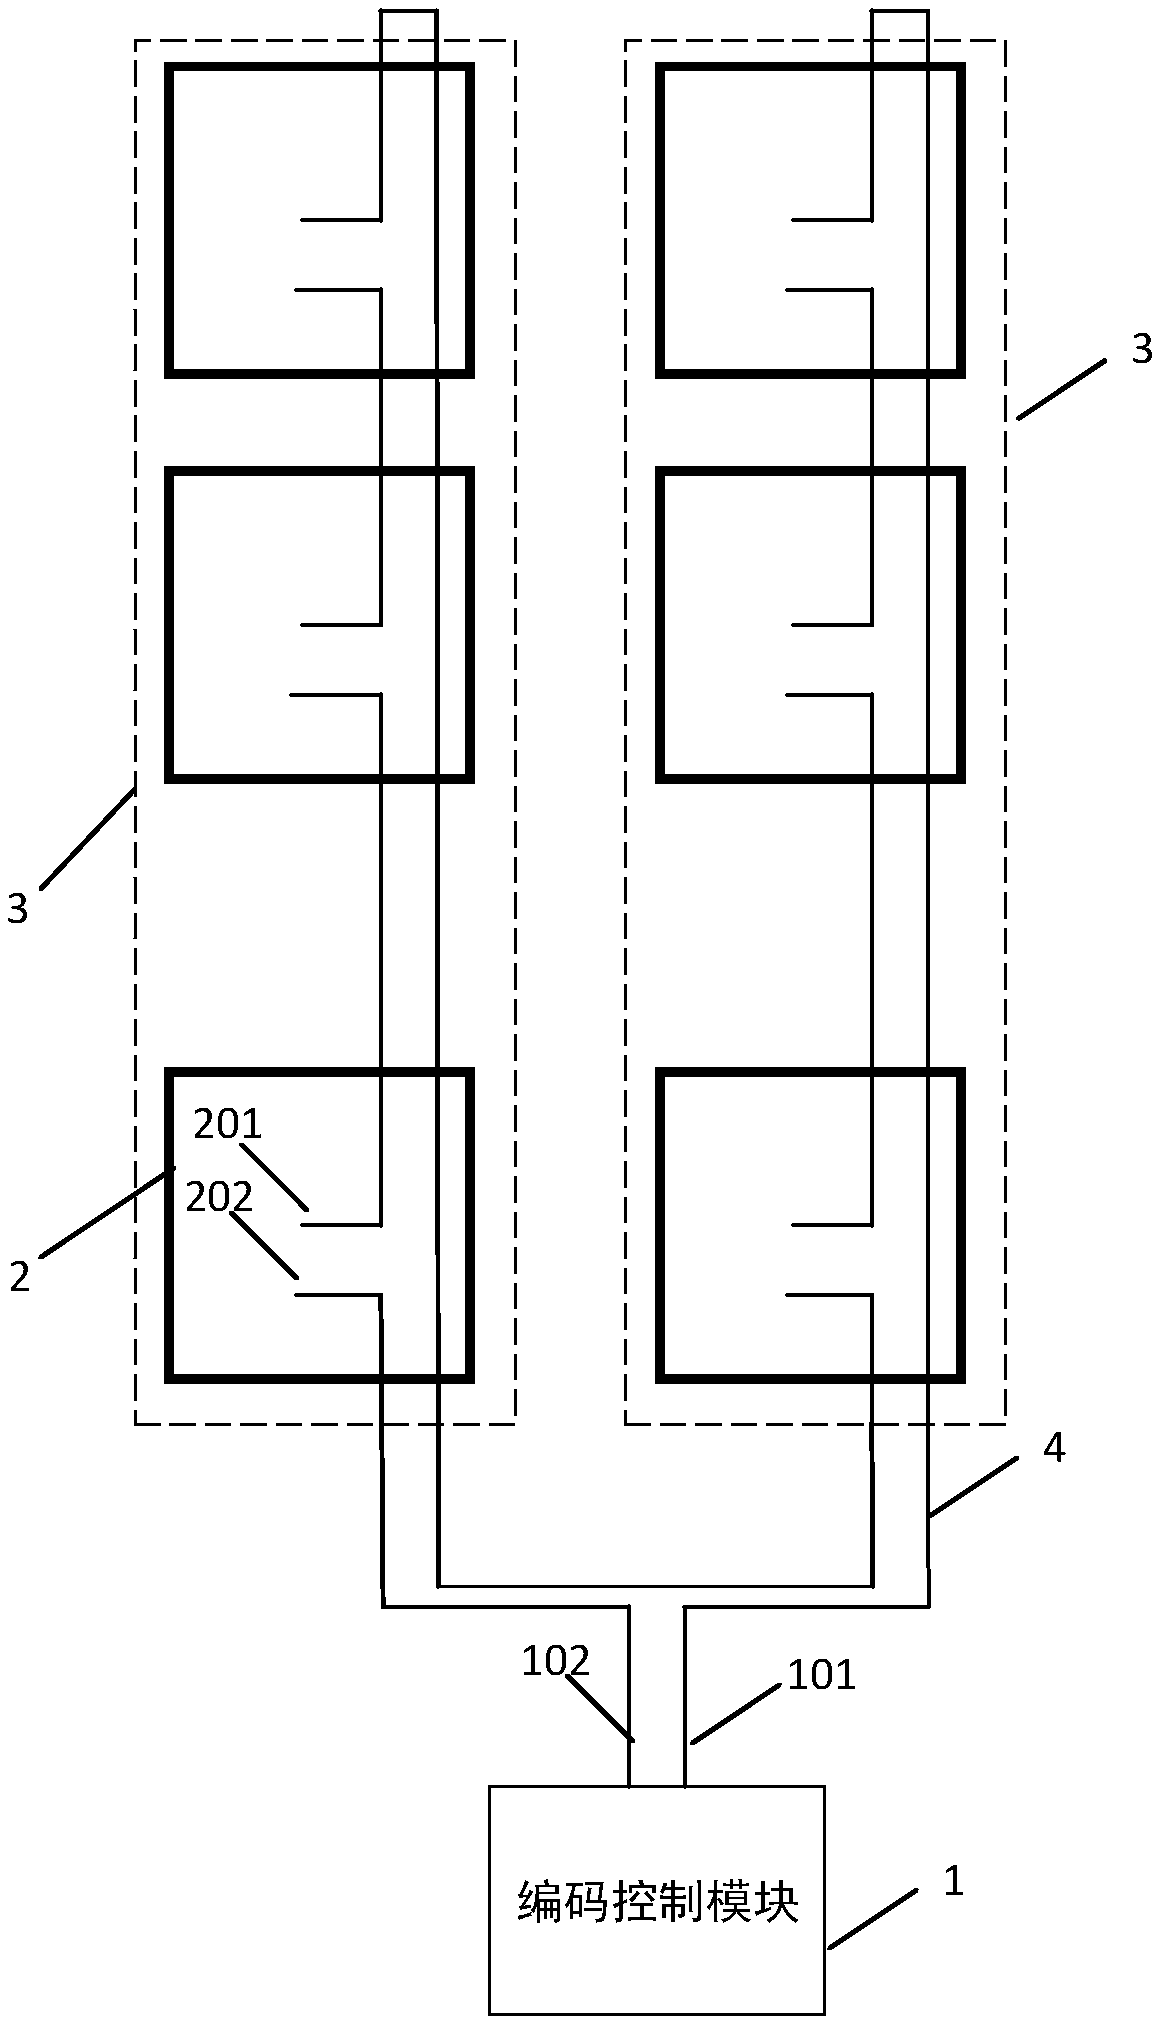 Communication control method for solar components